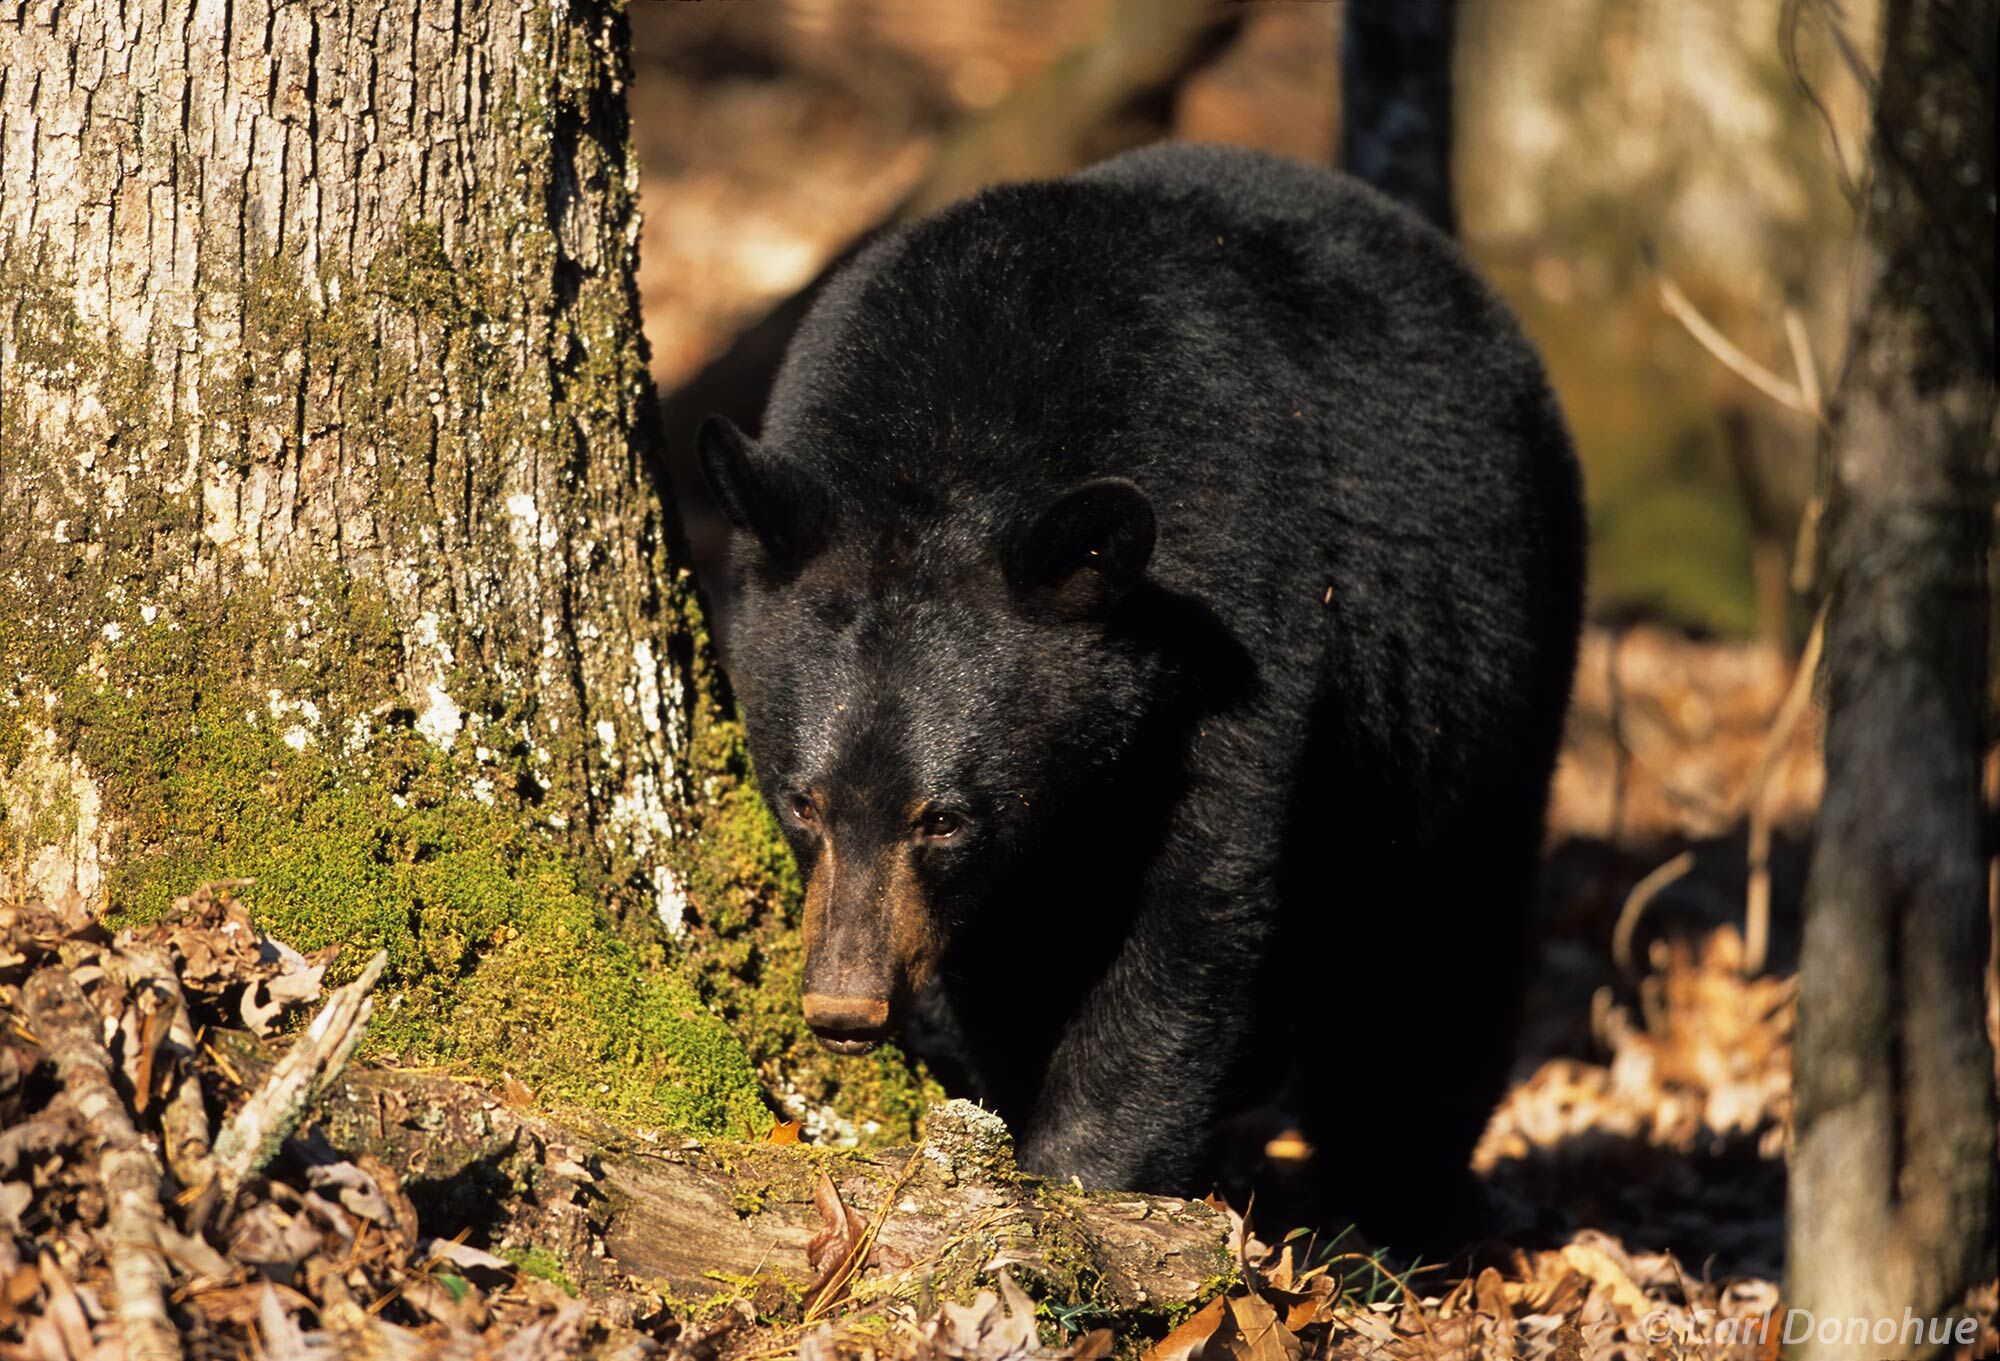 A young black bear cub walks through the forest near Cades Cove, Great Smoky Mountains, Tennessee.